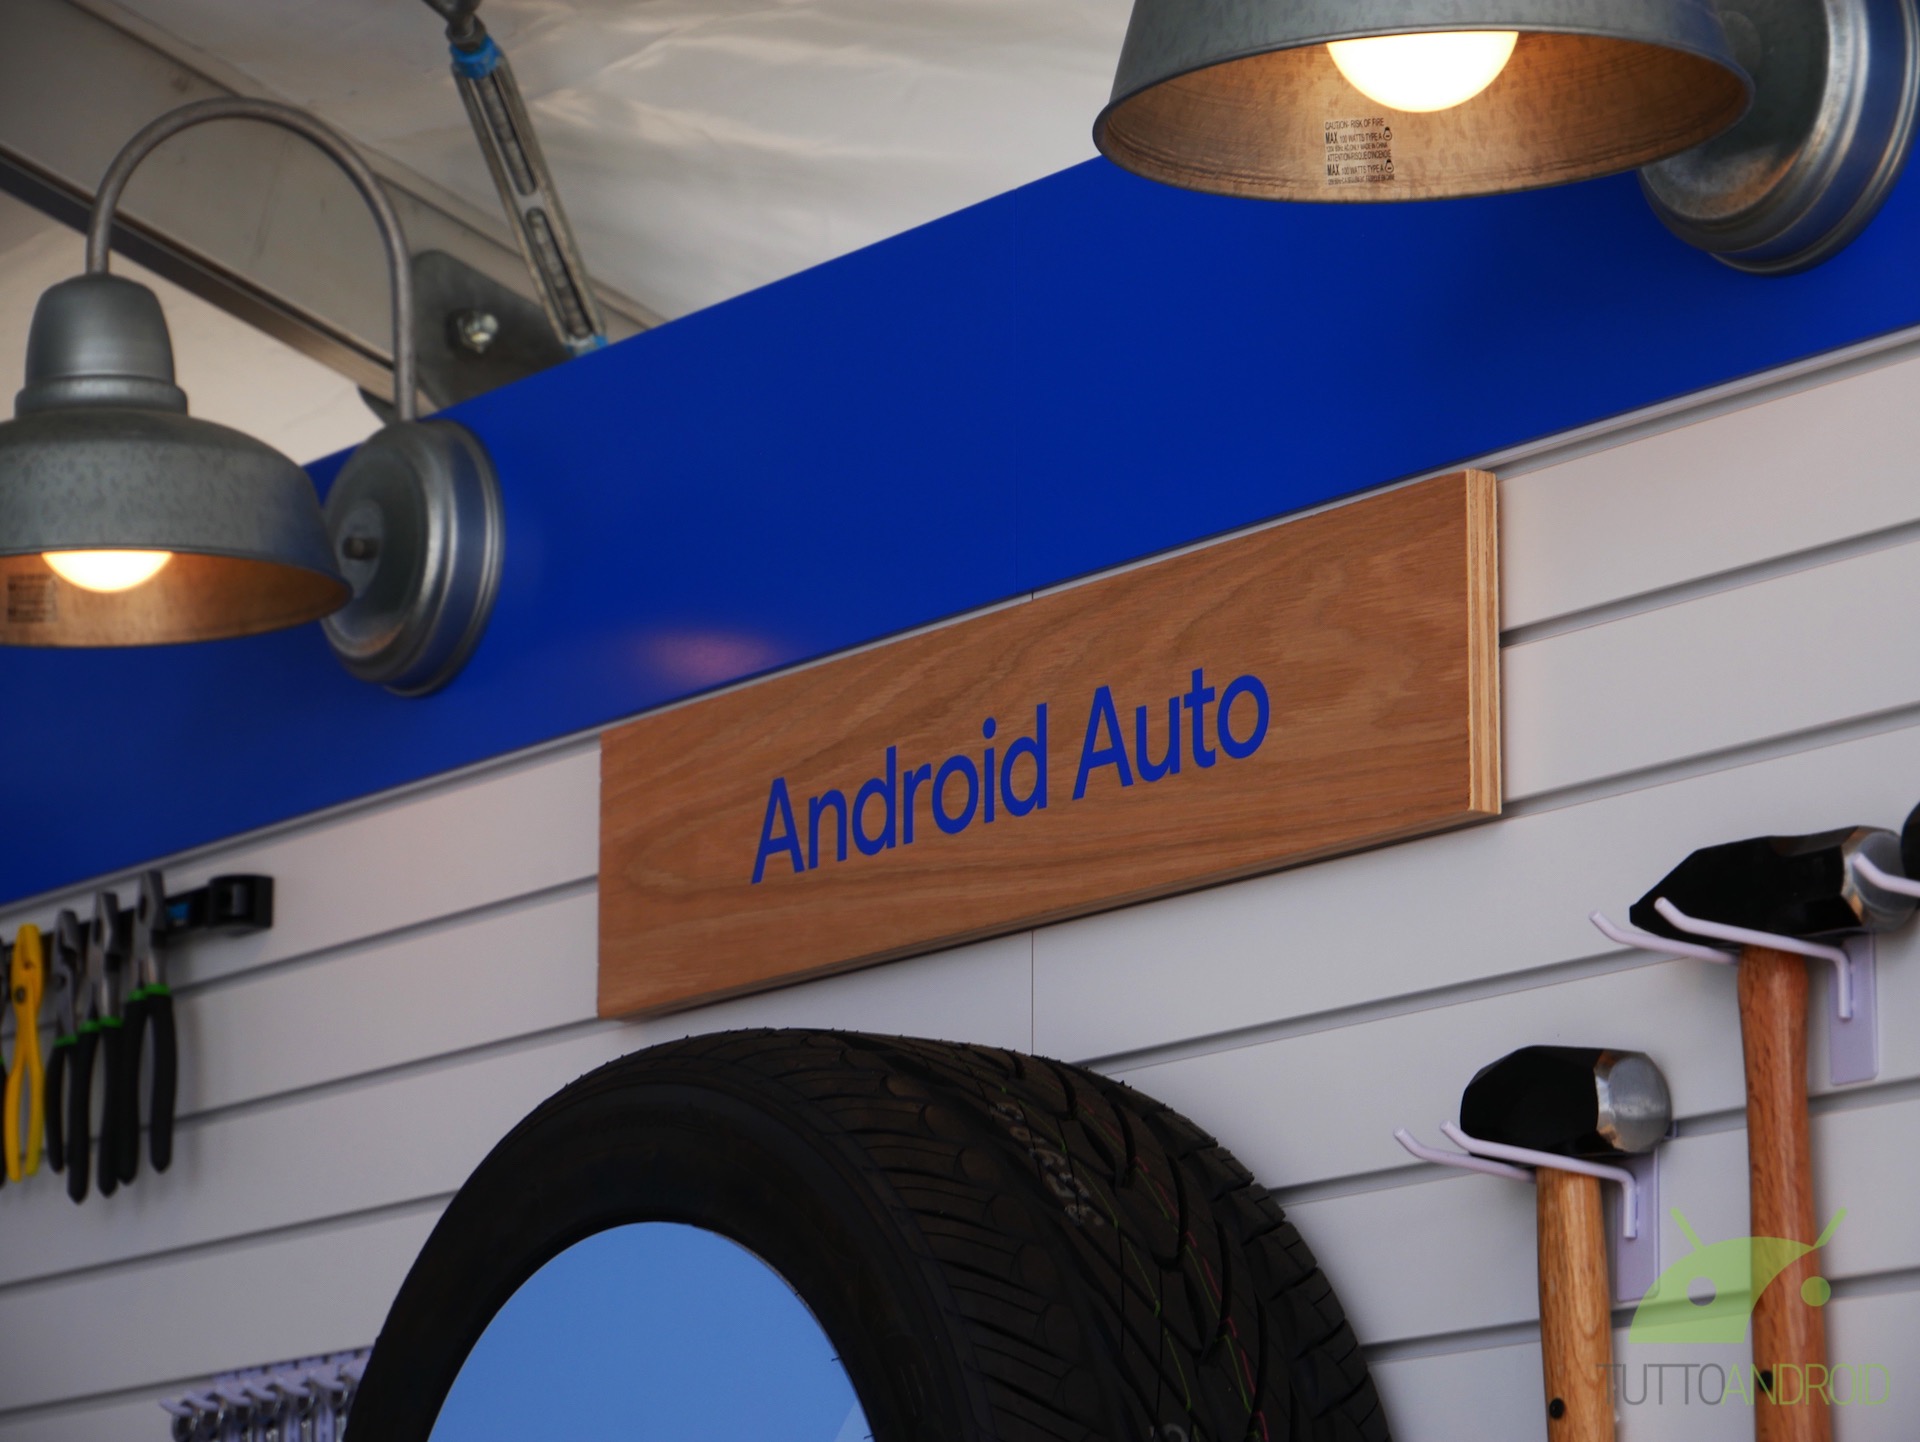 A year later there is an official solution to the Android Auto issue